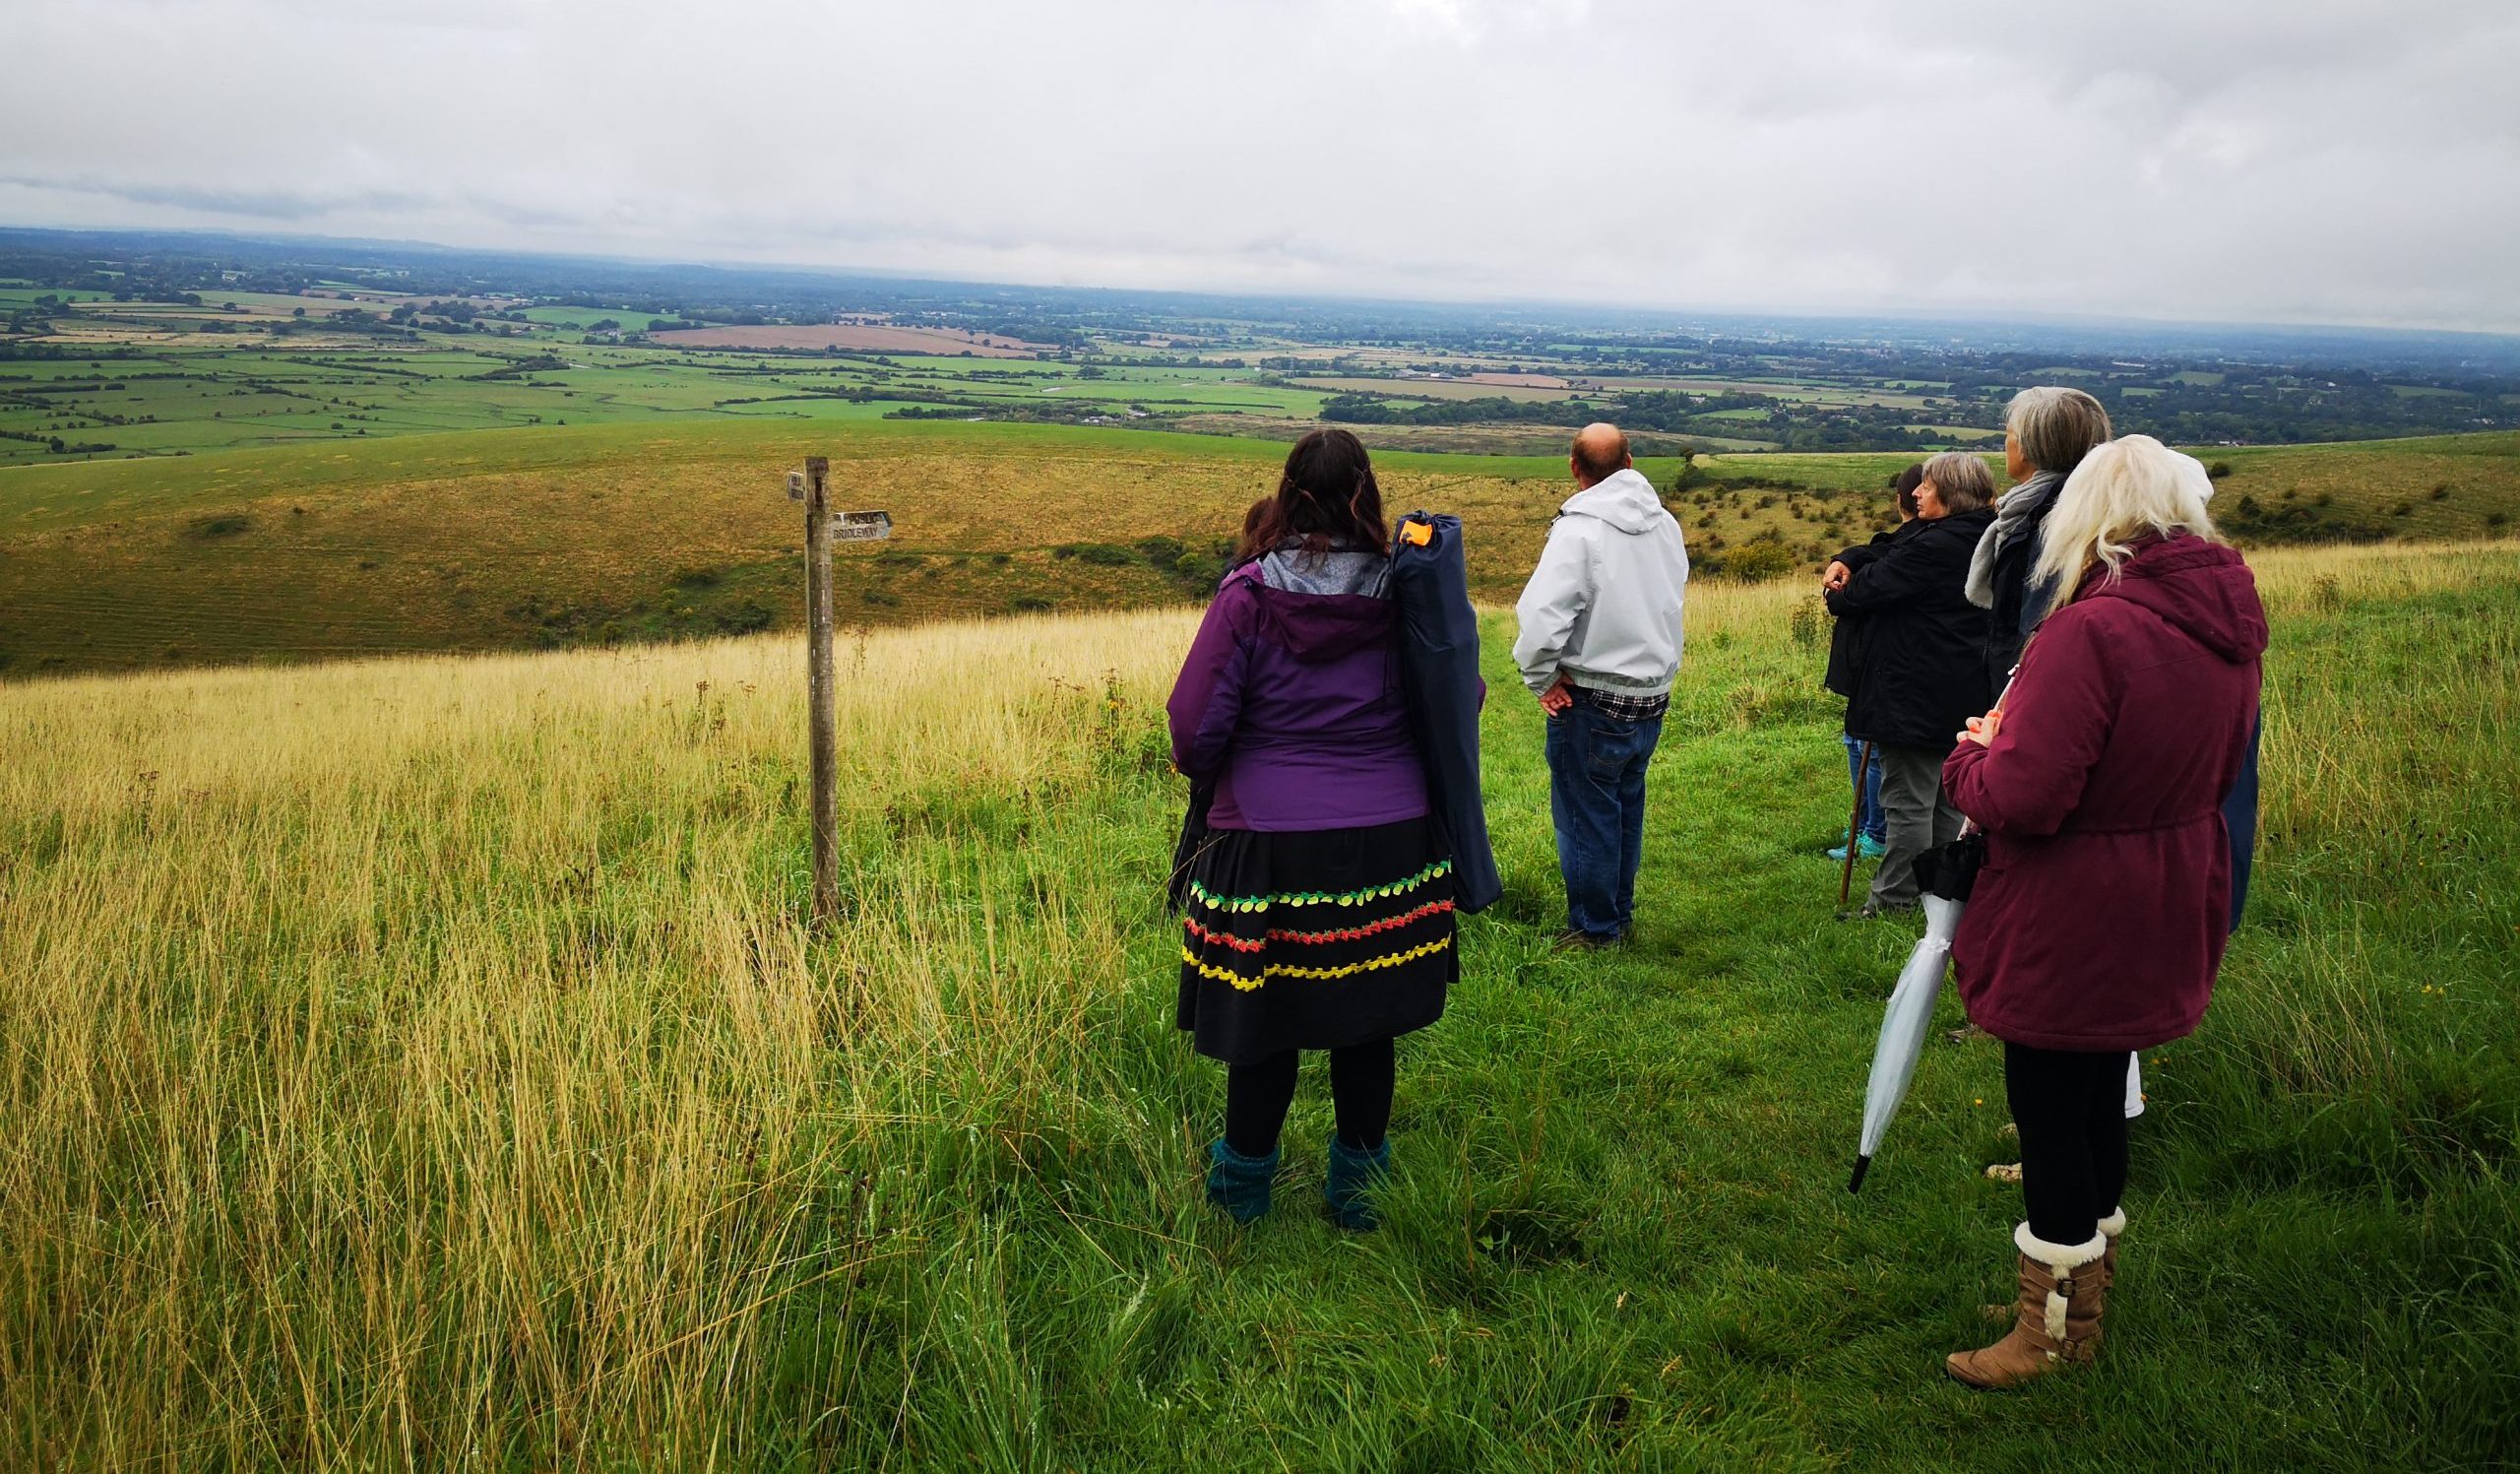 Food Partnership Growing New Roots Wellbeing group on the Sussex downs